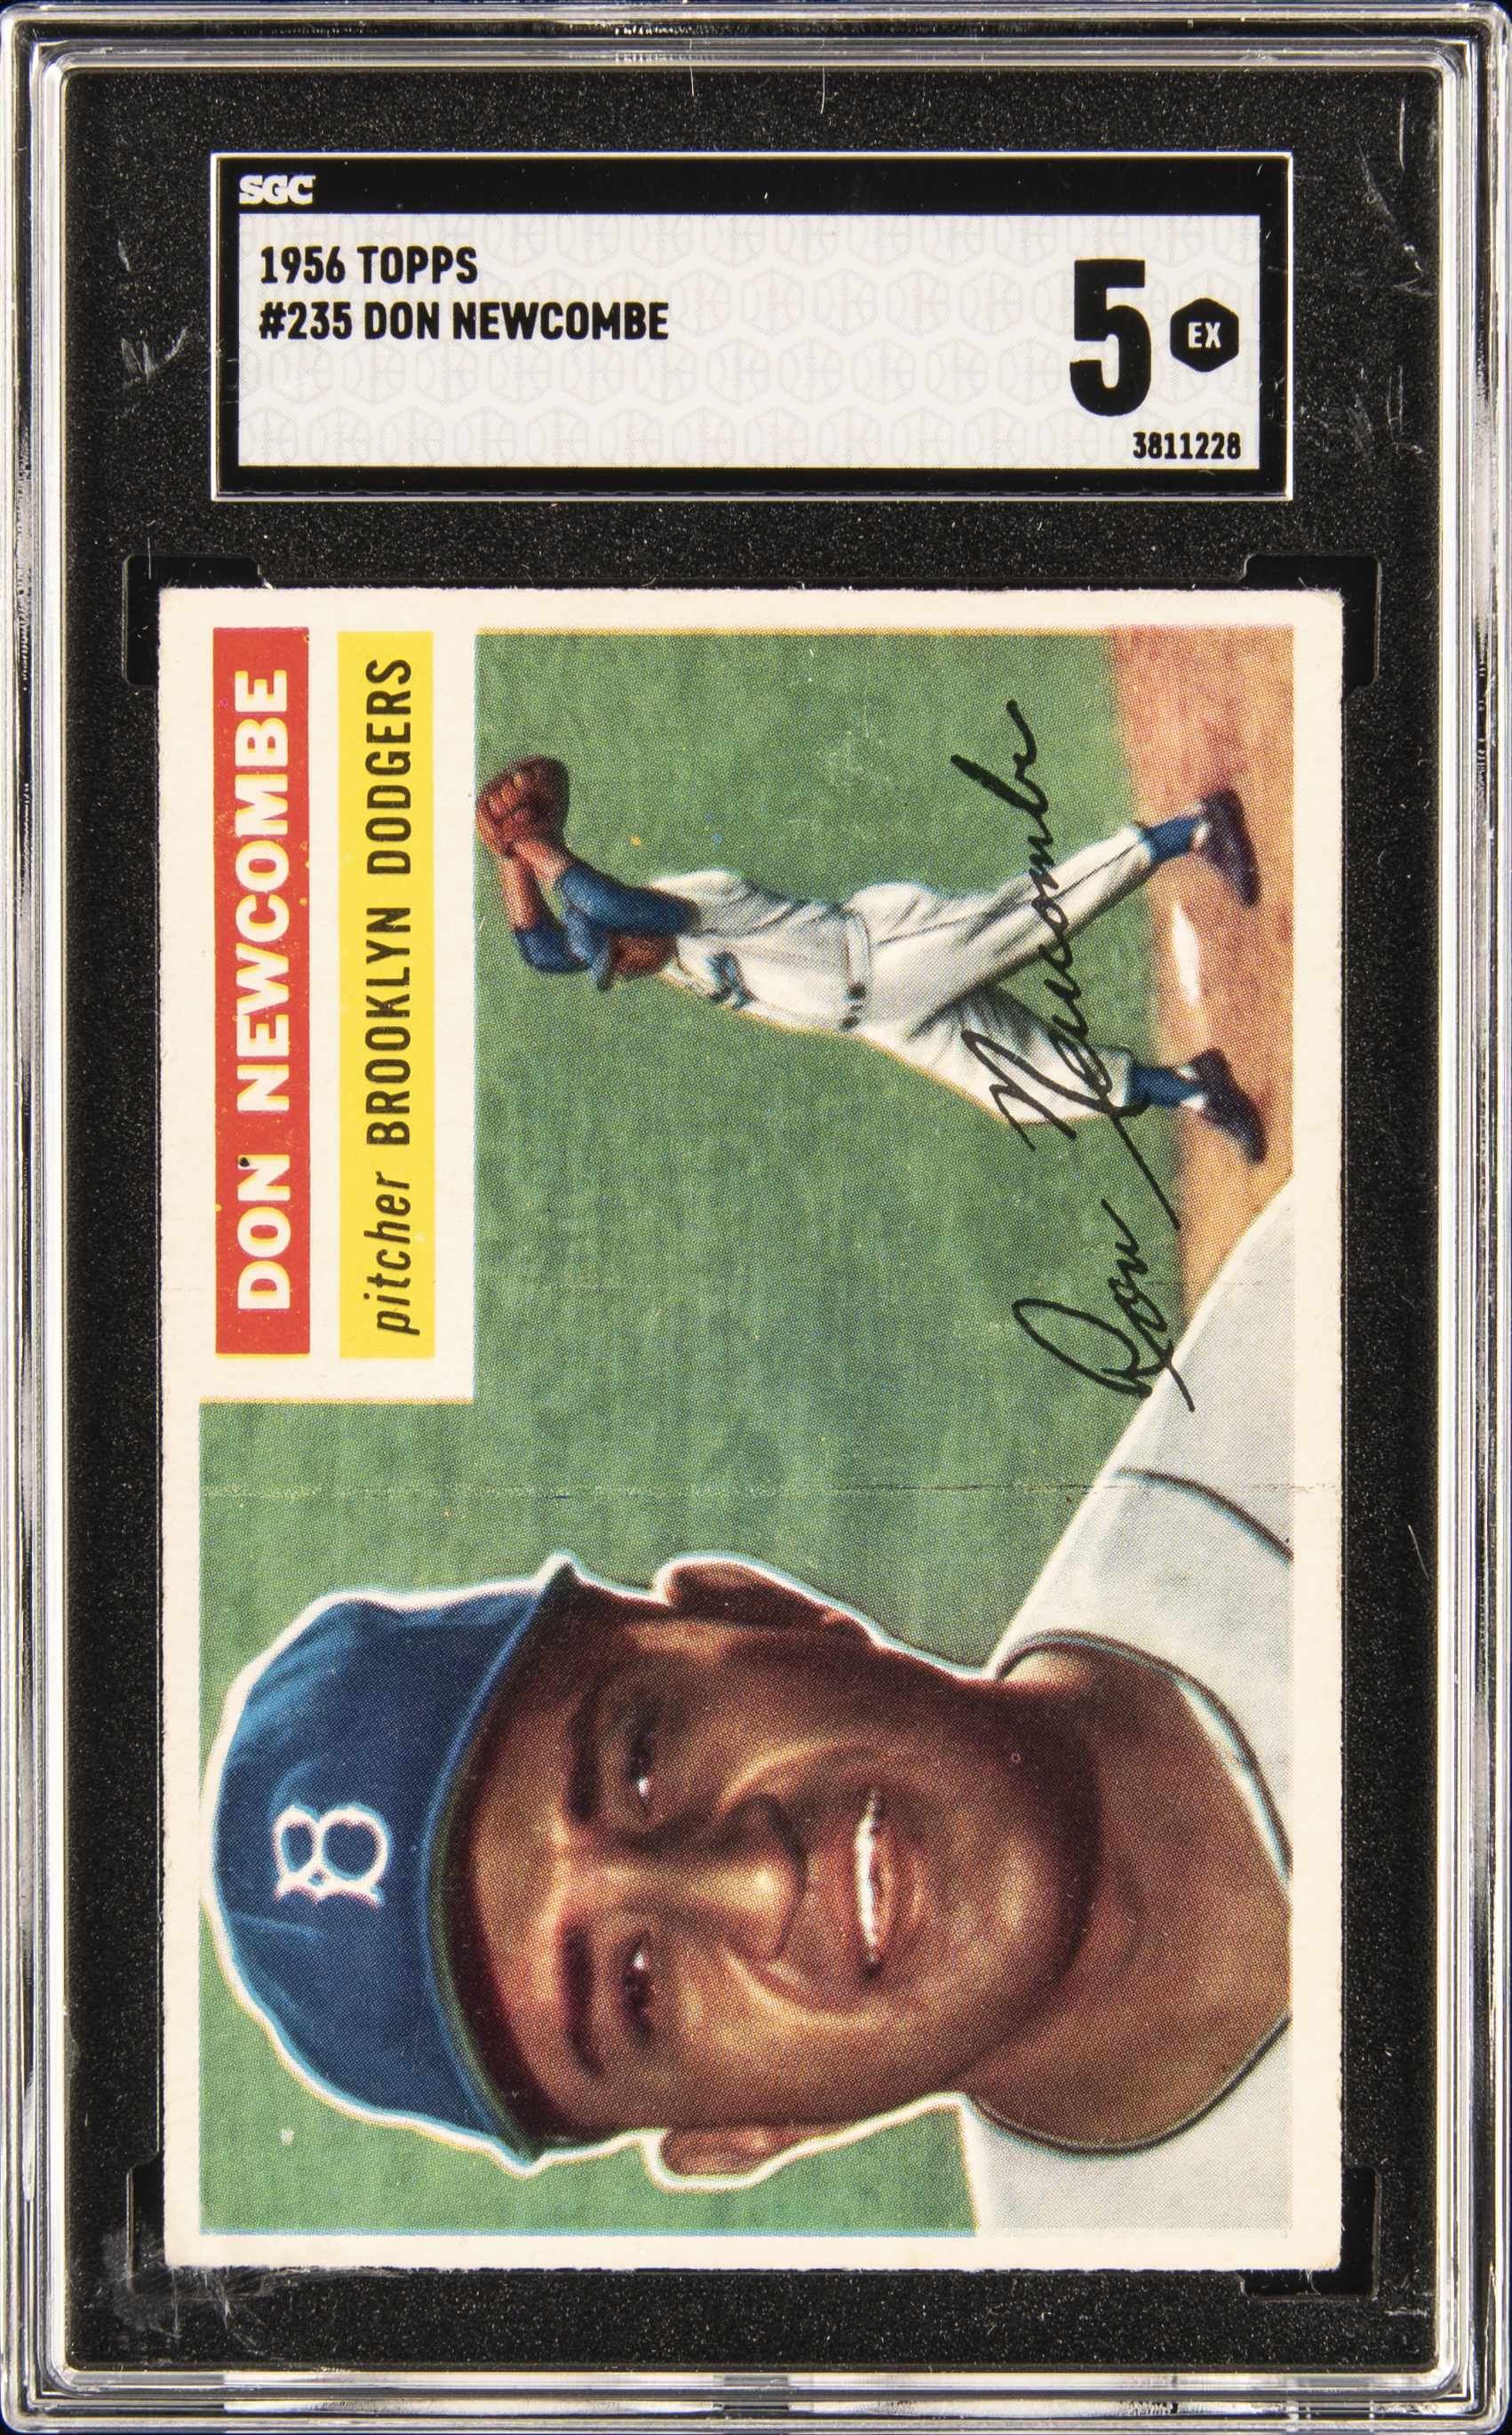 1956 Topps 235 Don Newcombe – SGC EX 5